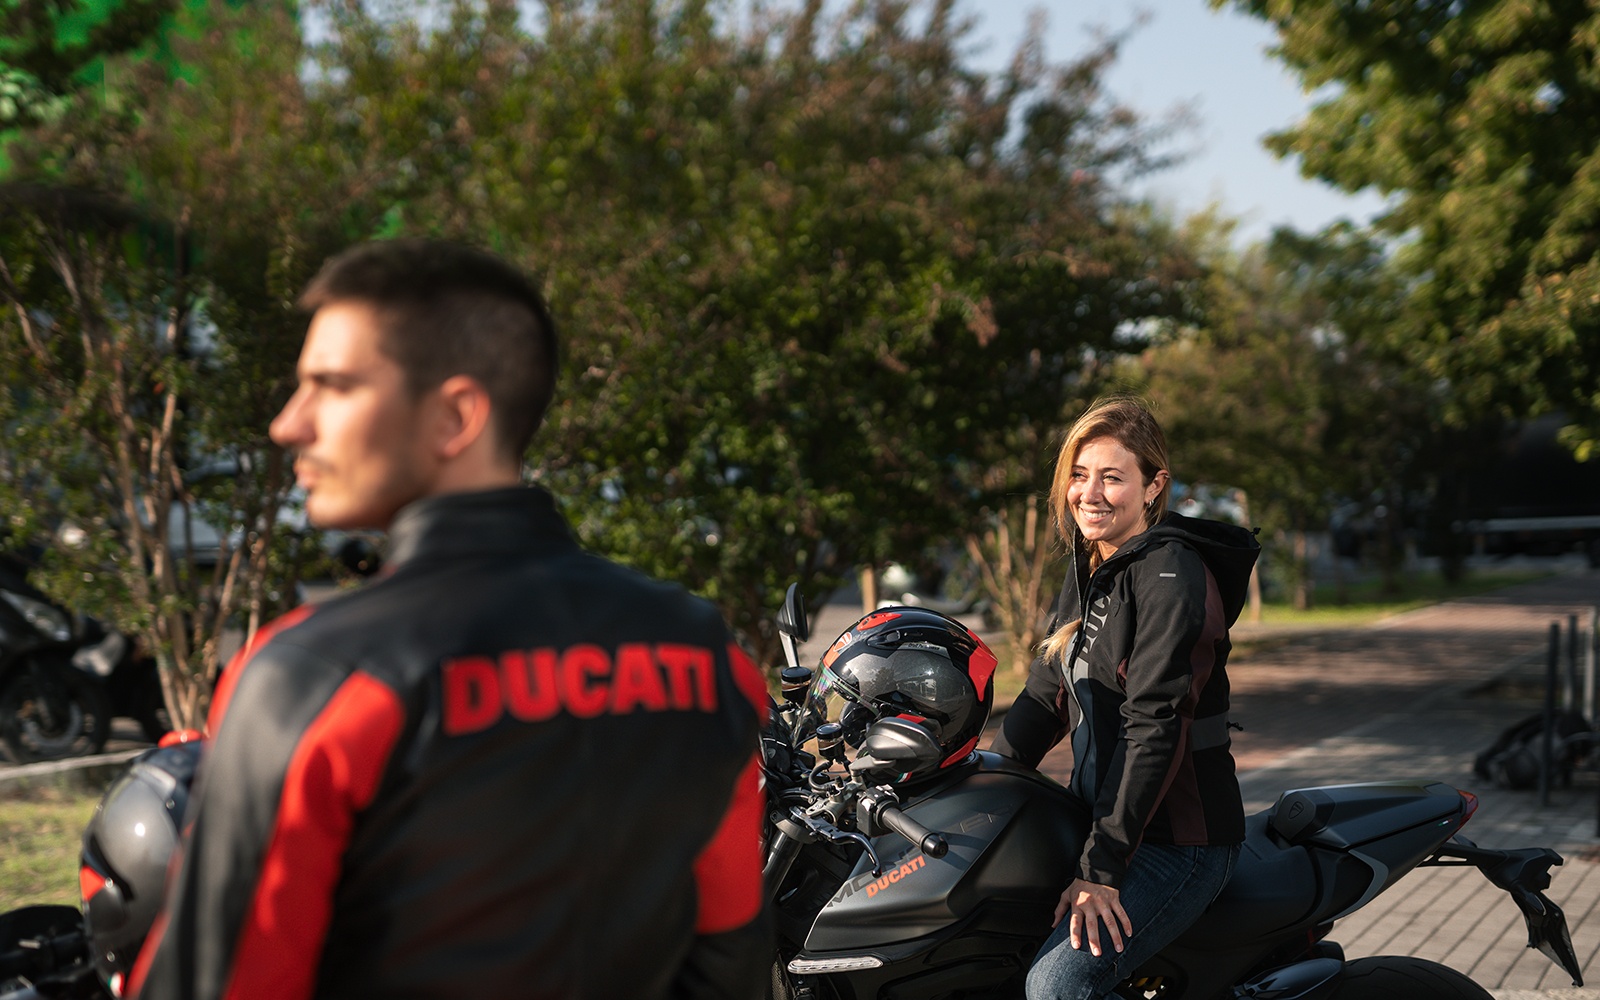 Ducati Apparel | Bikers' clothing and accessories for men, women